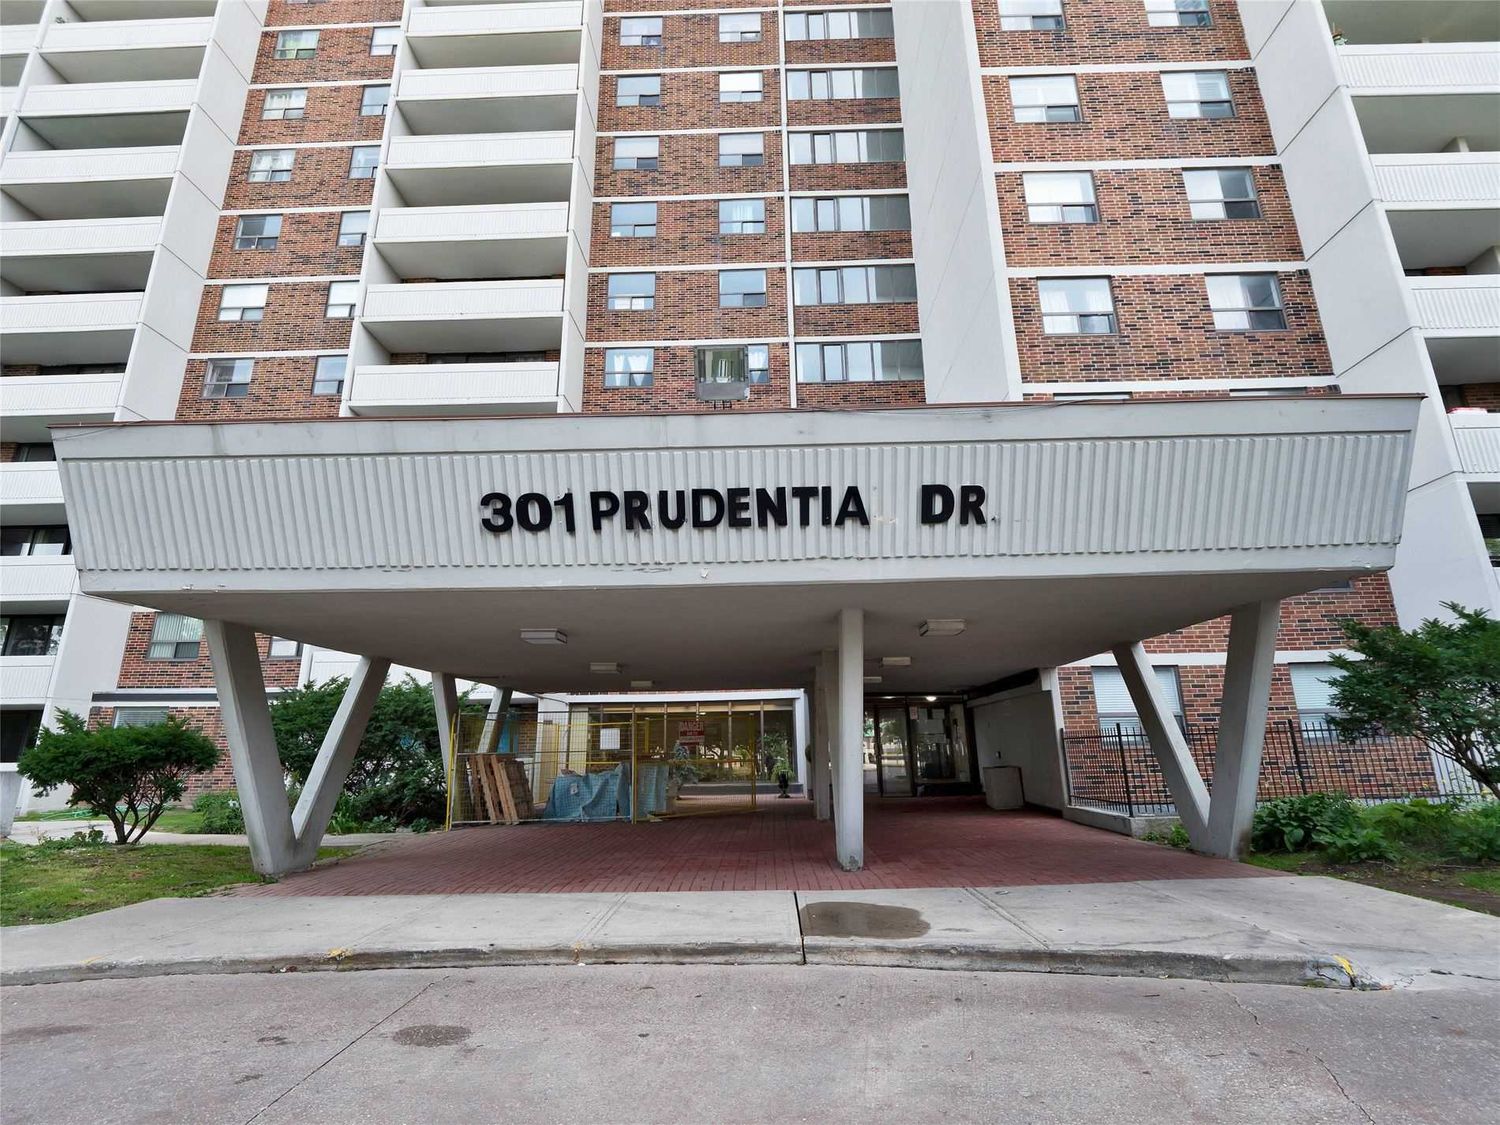 301 Prudential Drive. 301 Prudential Drive Condos is located in  Scarborough, Toronto - image #3 of 3